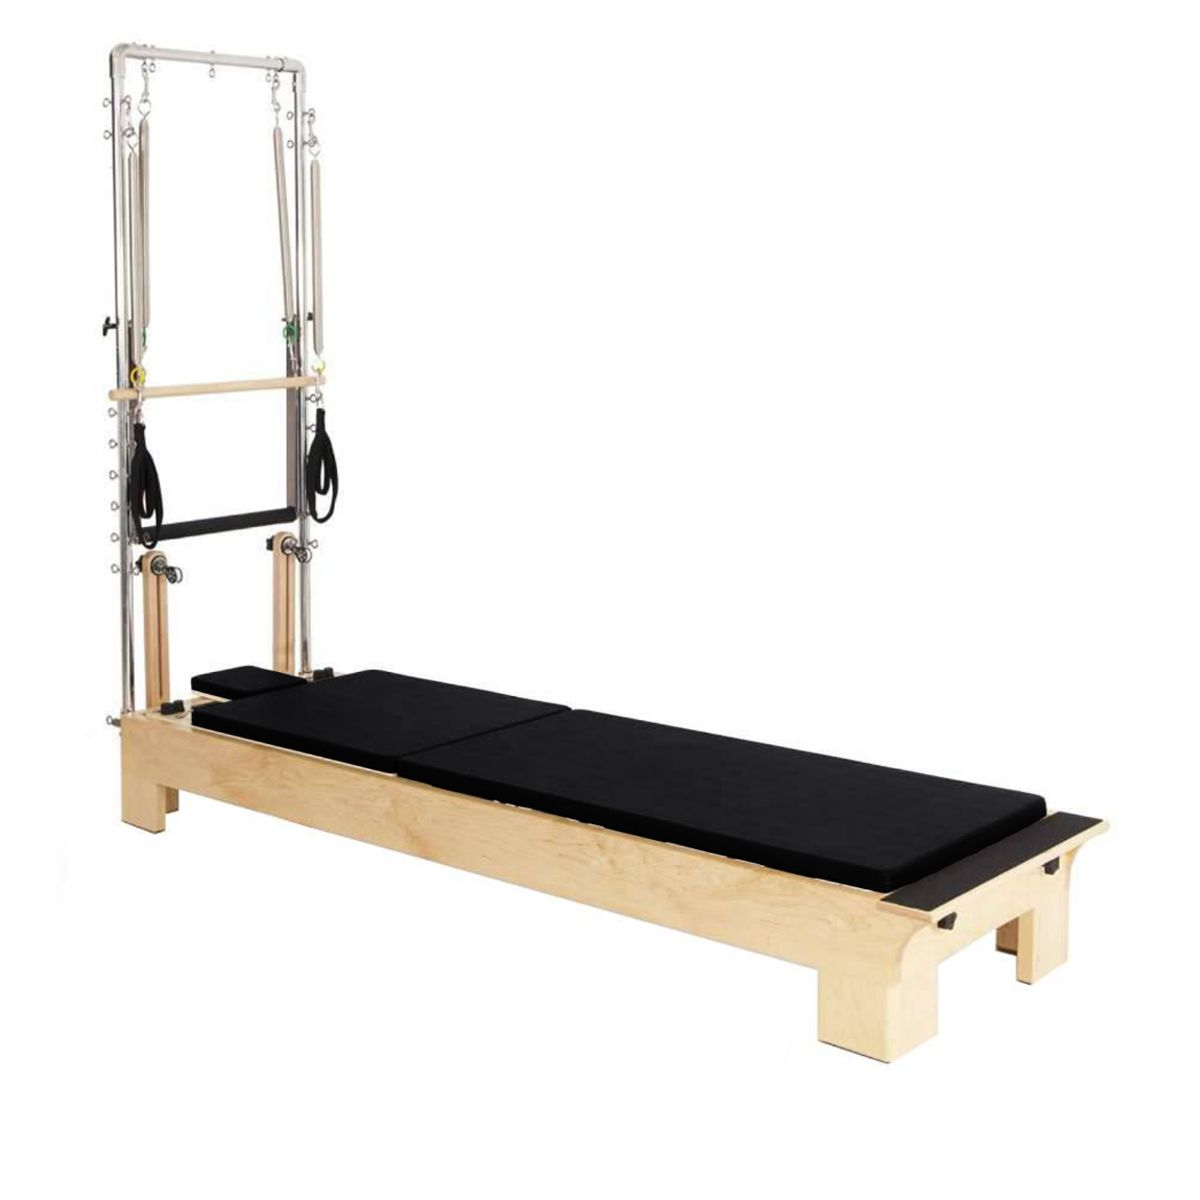  Napolie Pilates Bed Pilates Reformer - Full Trapeze Yoga and Pilates  Bed Machine : Sports & Outdoors